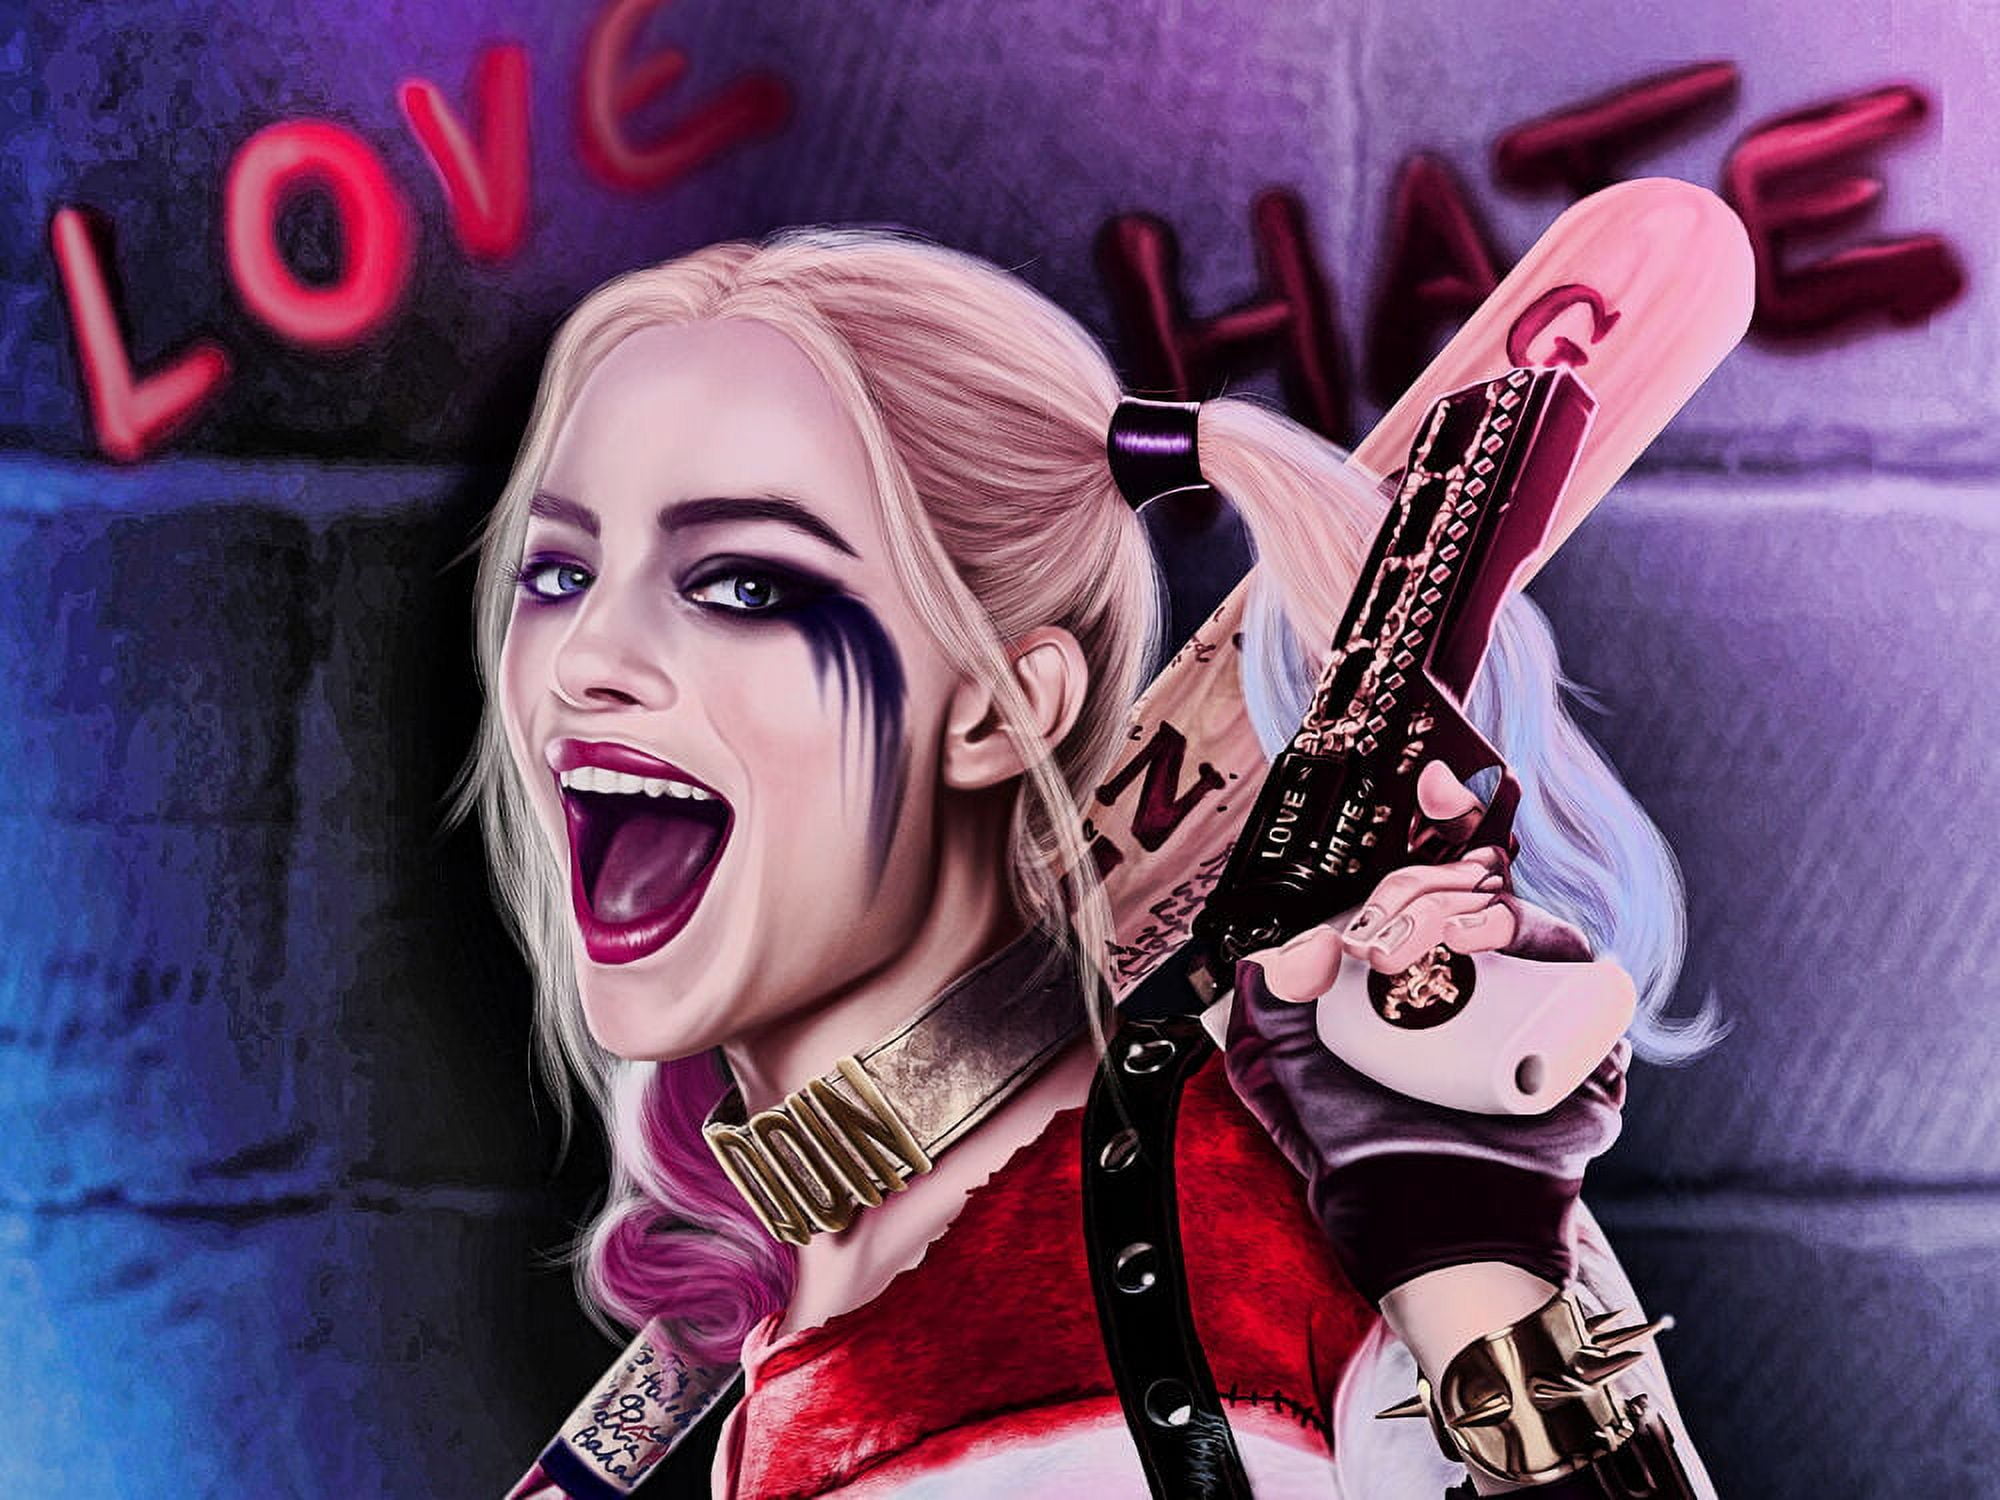 HARLEY QUINN (SUICIDE SQUAD) POSTER 24 X 36 INCH Looks Awesome!